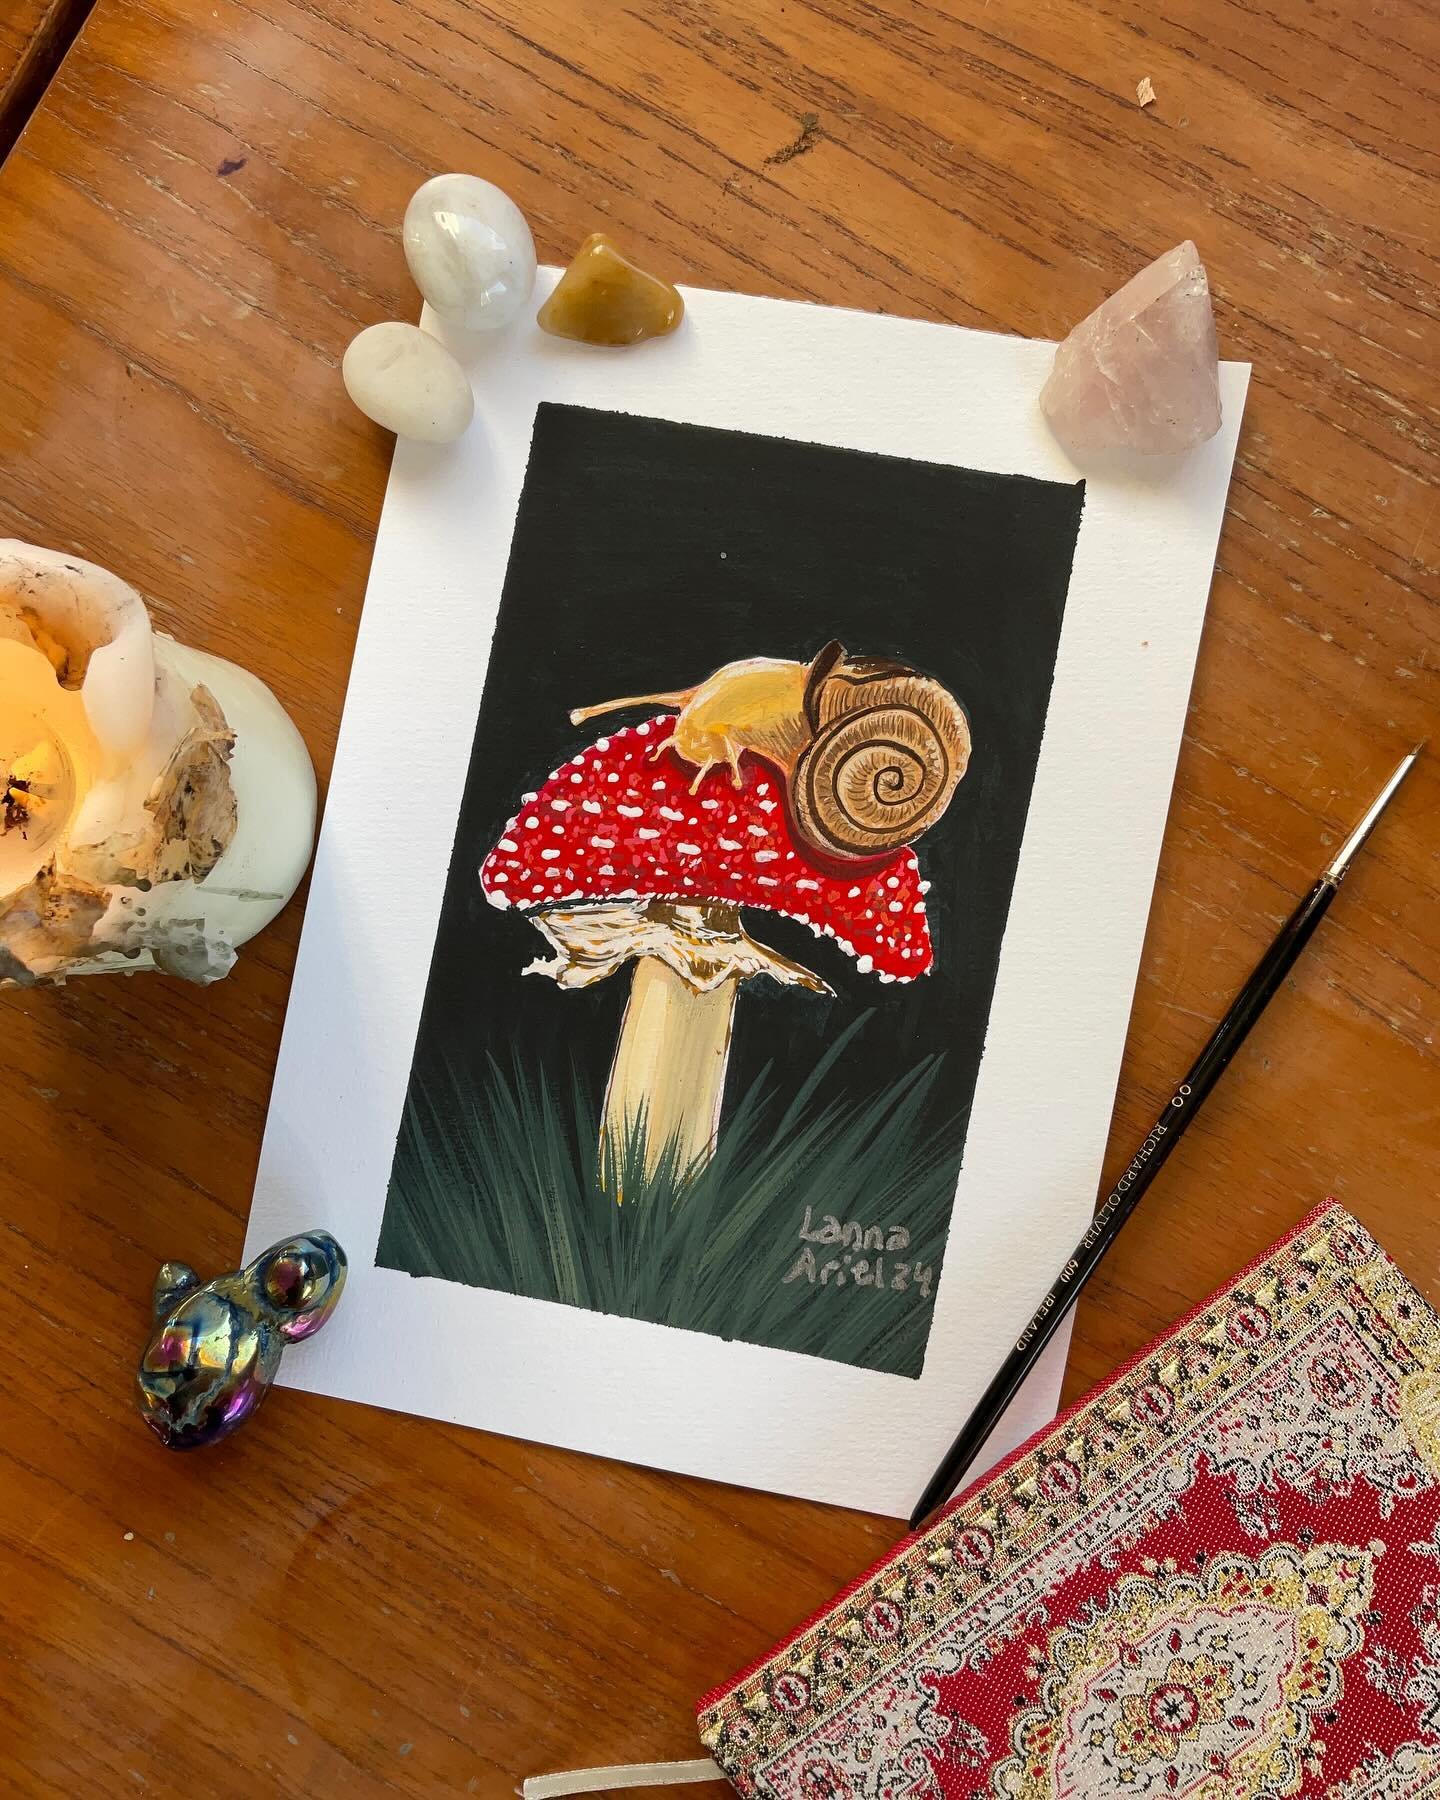 🐌I have many of this paintings available as I have just launched the Works on Paper Collection! 🌹

It&rsquo;s mystical &amp; nature inspired because I know you all love the vibezzzz 🔮

💌I also just started a mailing list and you get a coupon for 